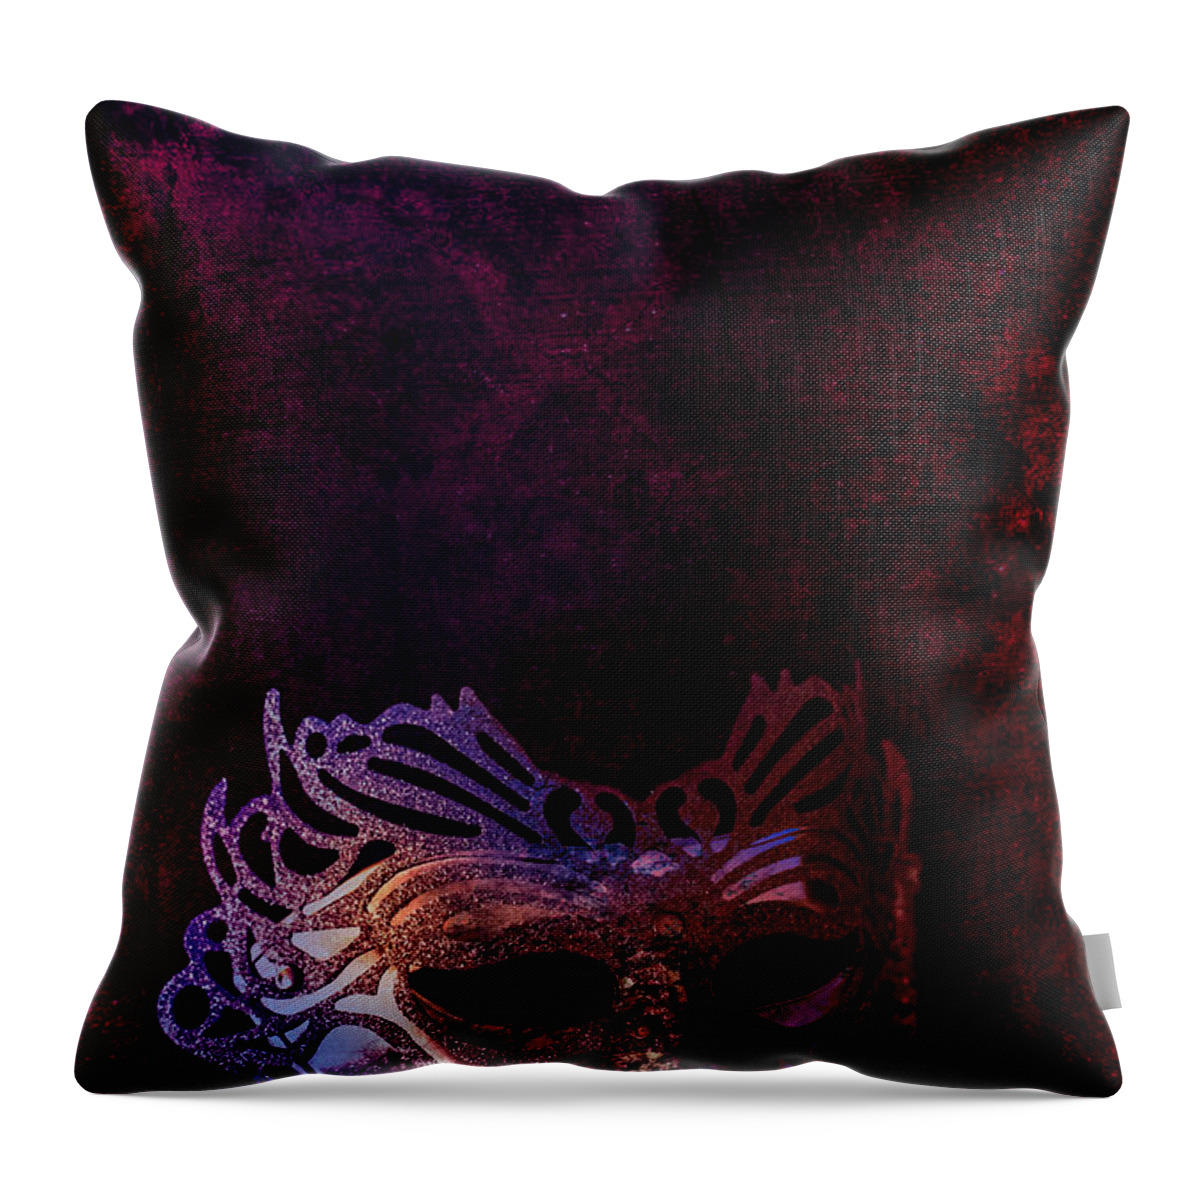 Mask Throw Pillow featuring the photograph About Last Night by Elvira Pinkhas